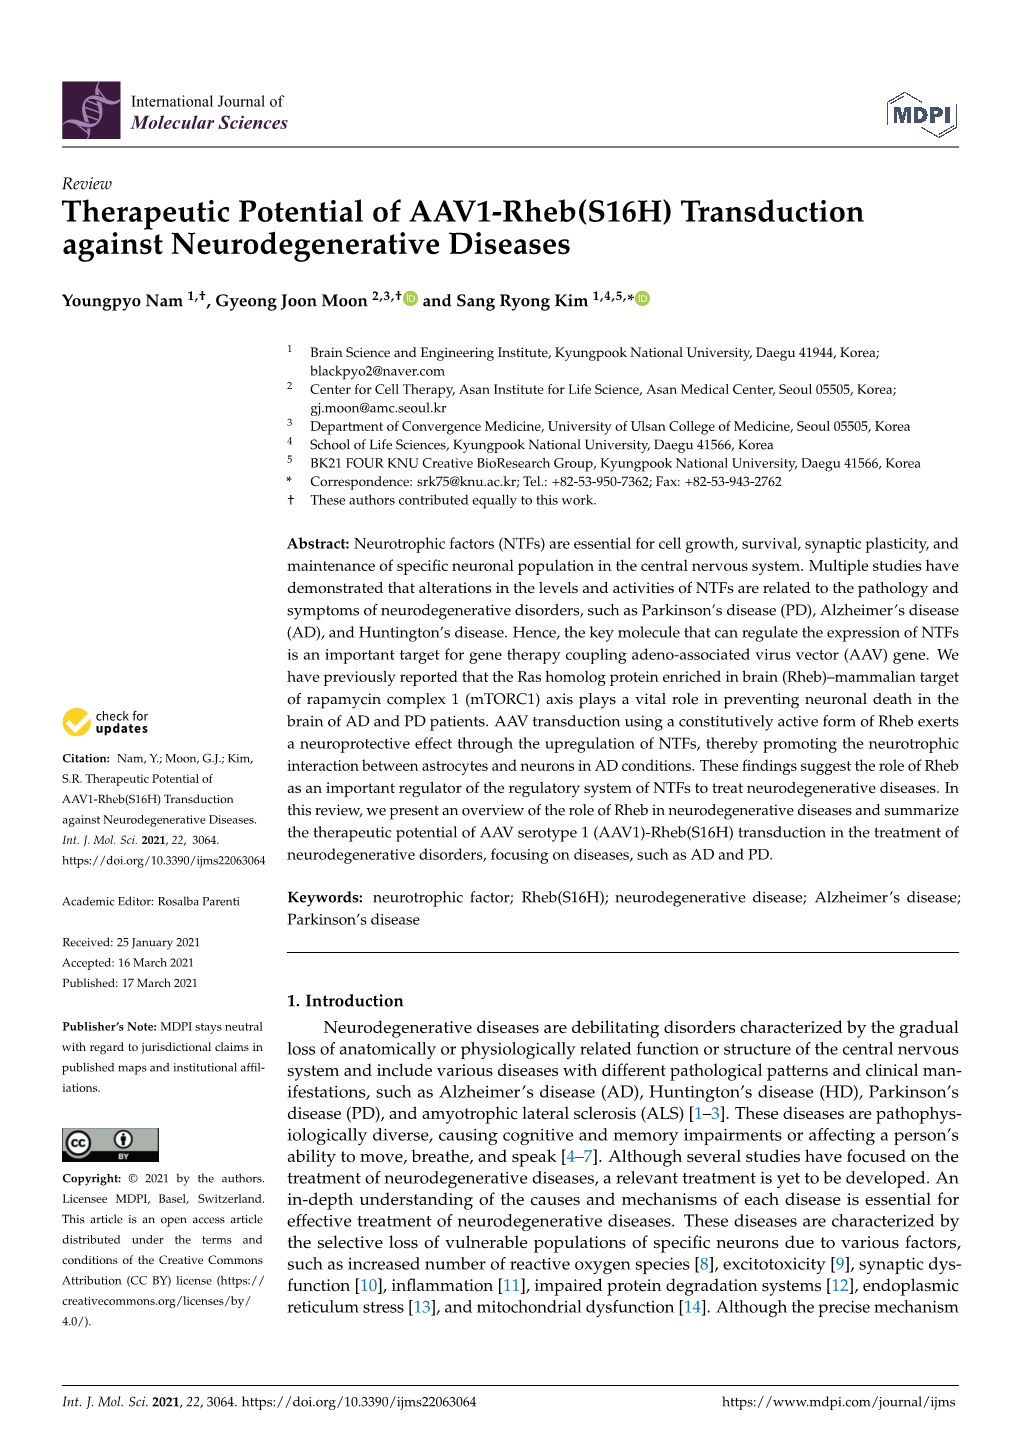 Therapeutic Potential of AAV1-Rheb(S16H) Transduction Against Neurodegenerative Diseases